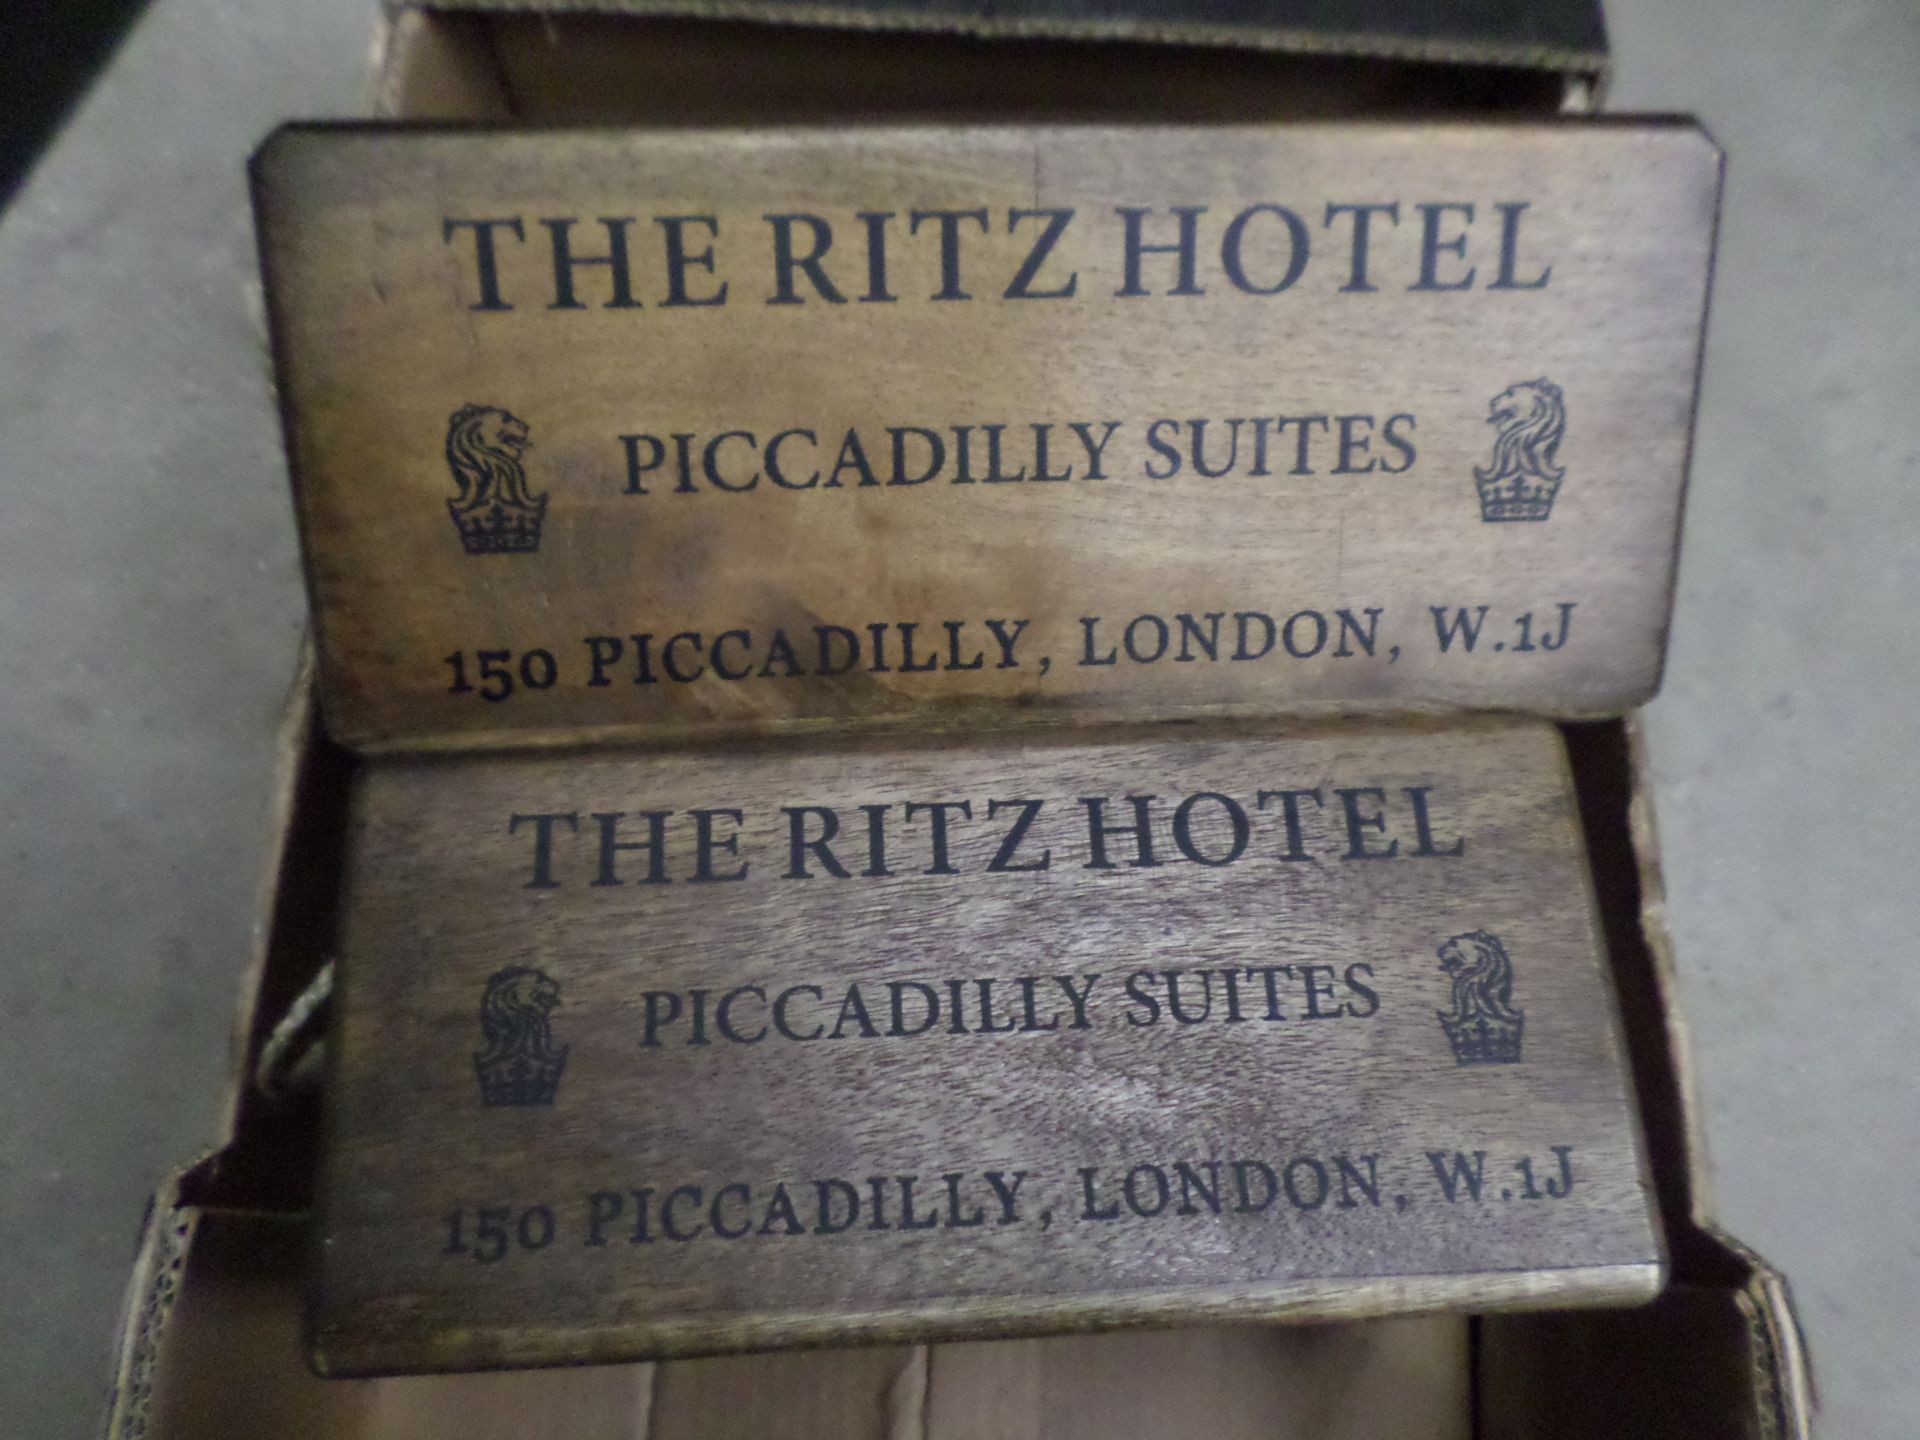 The Ritz Hotel, set of 5 boxes